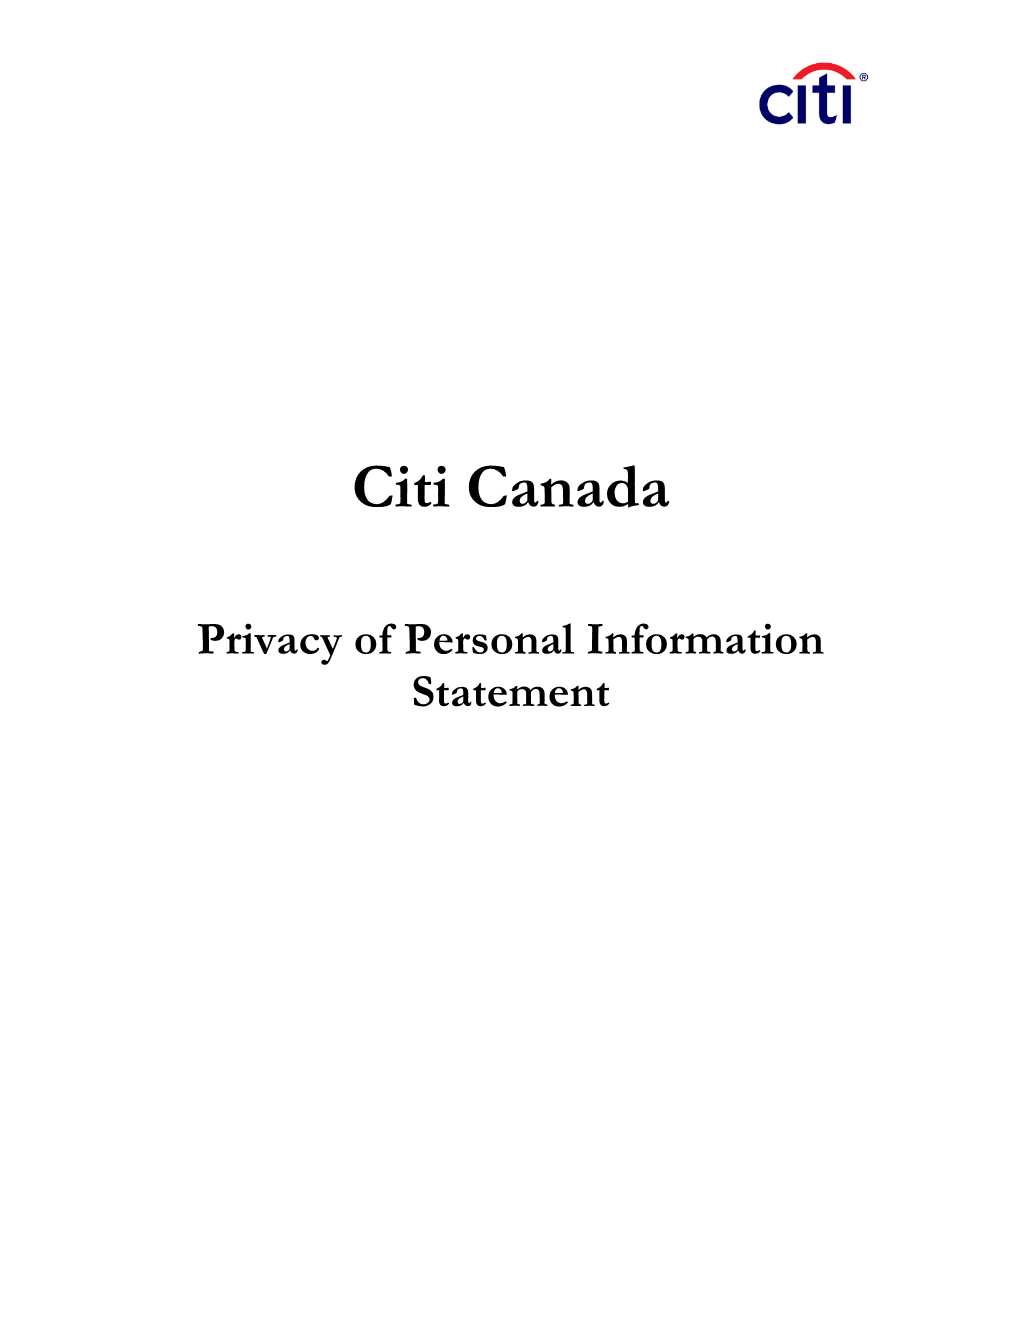 Citi Canada Privacy of Personal Information Statement